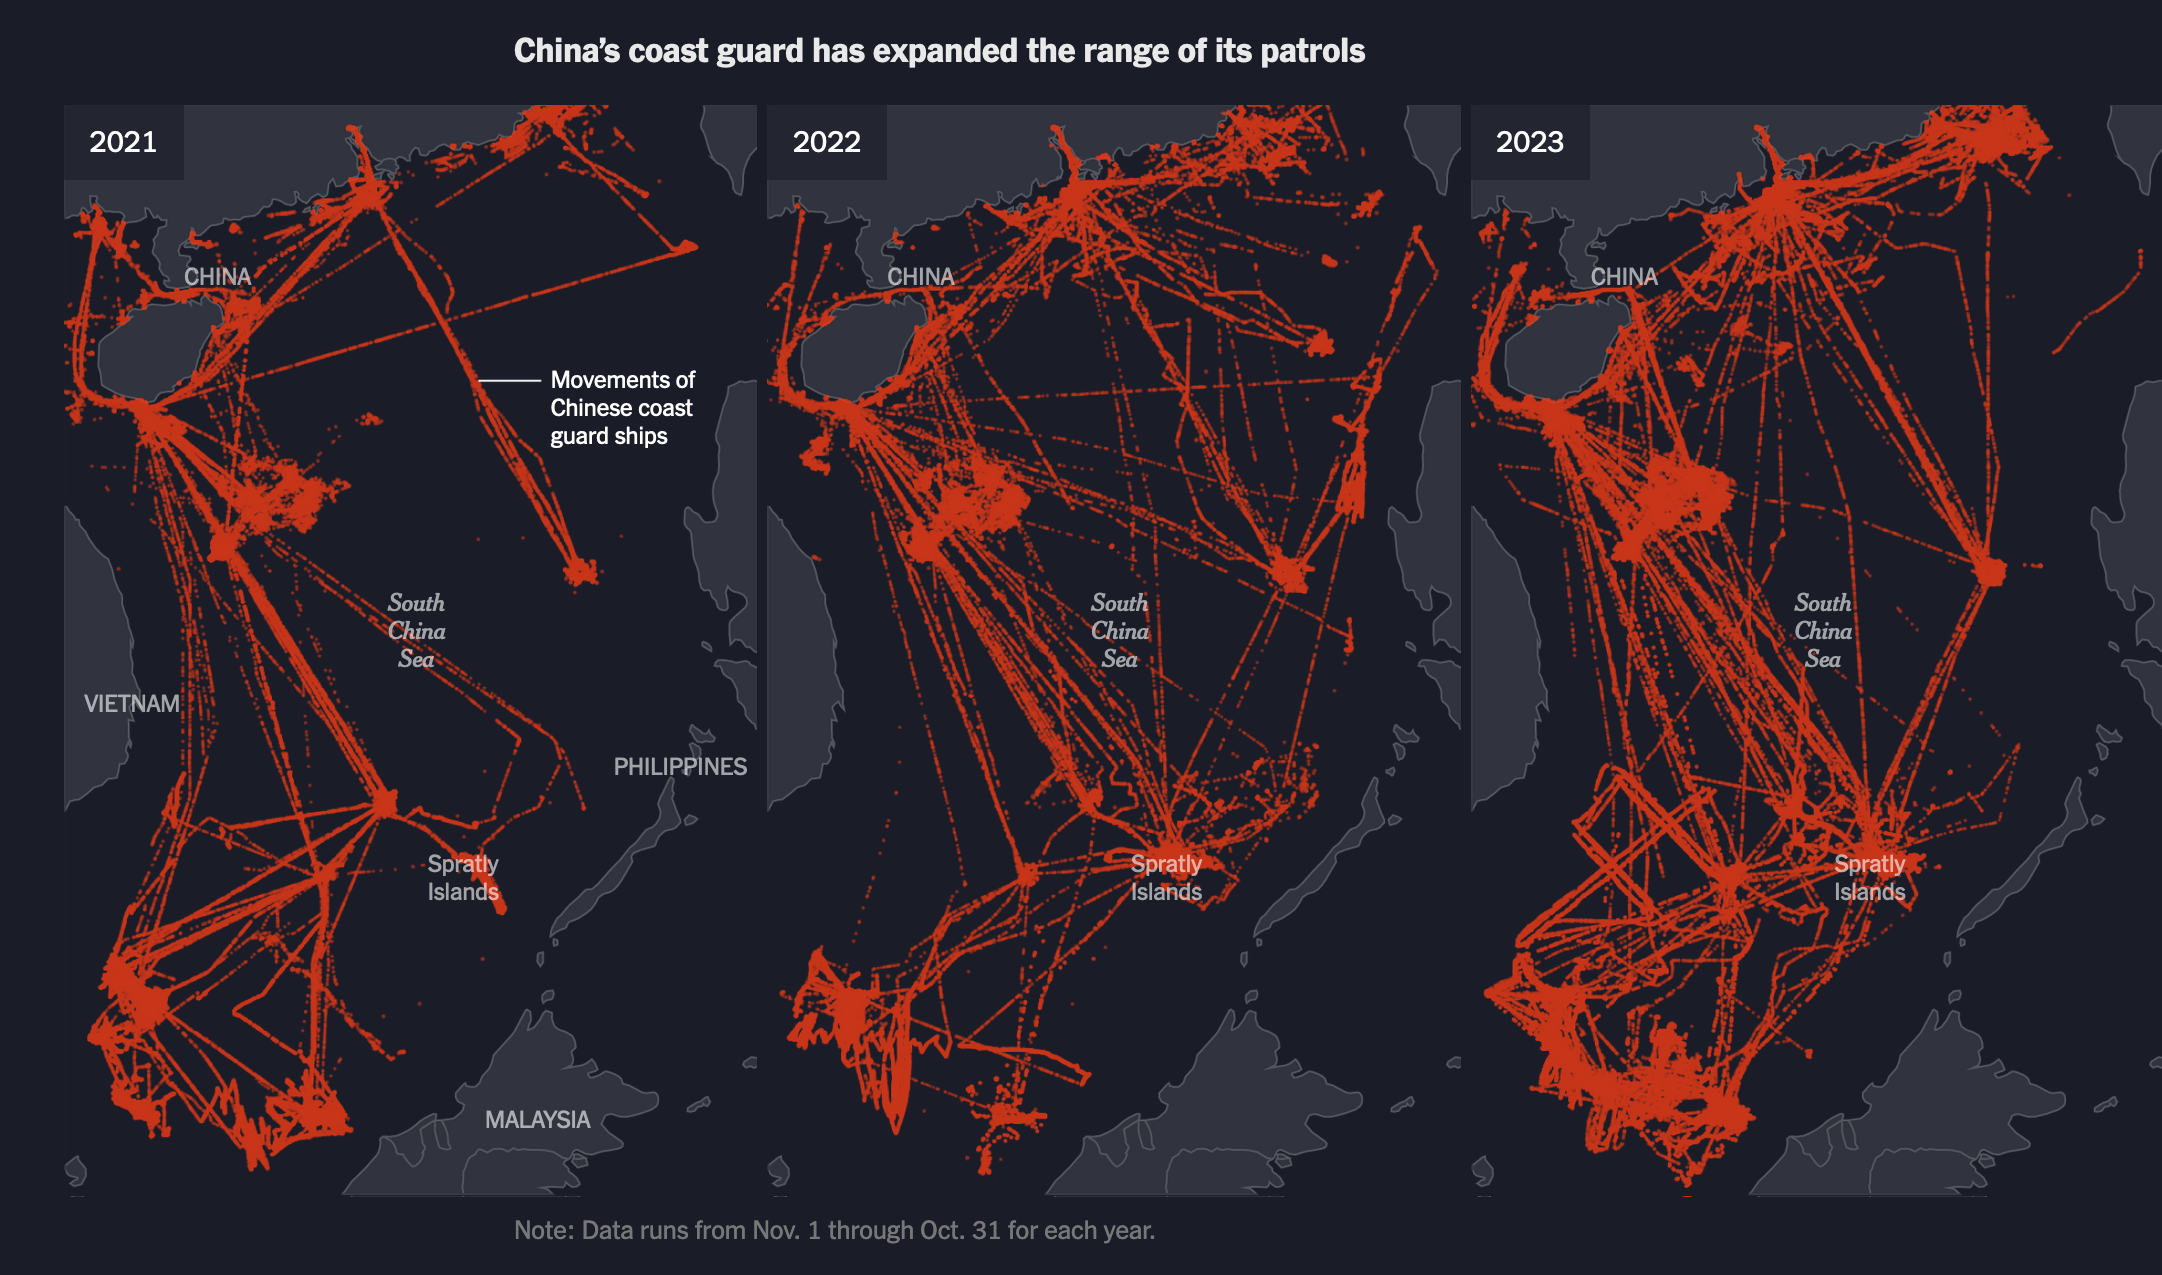 China's coast guard has expanded. Small multiples (2021, 2022, 2023), ships visualized with dots.